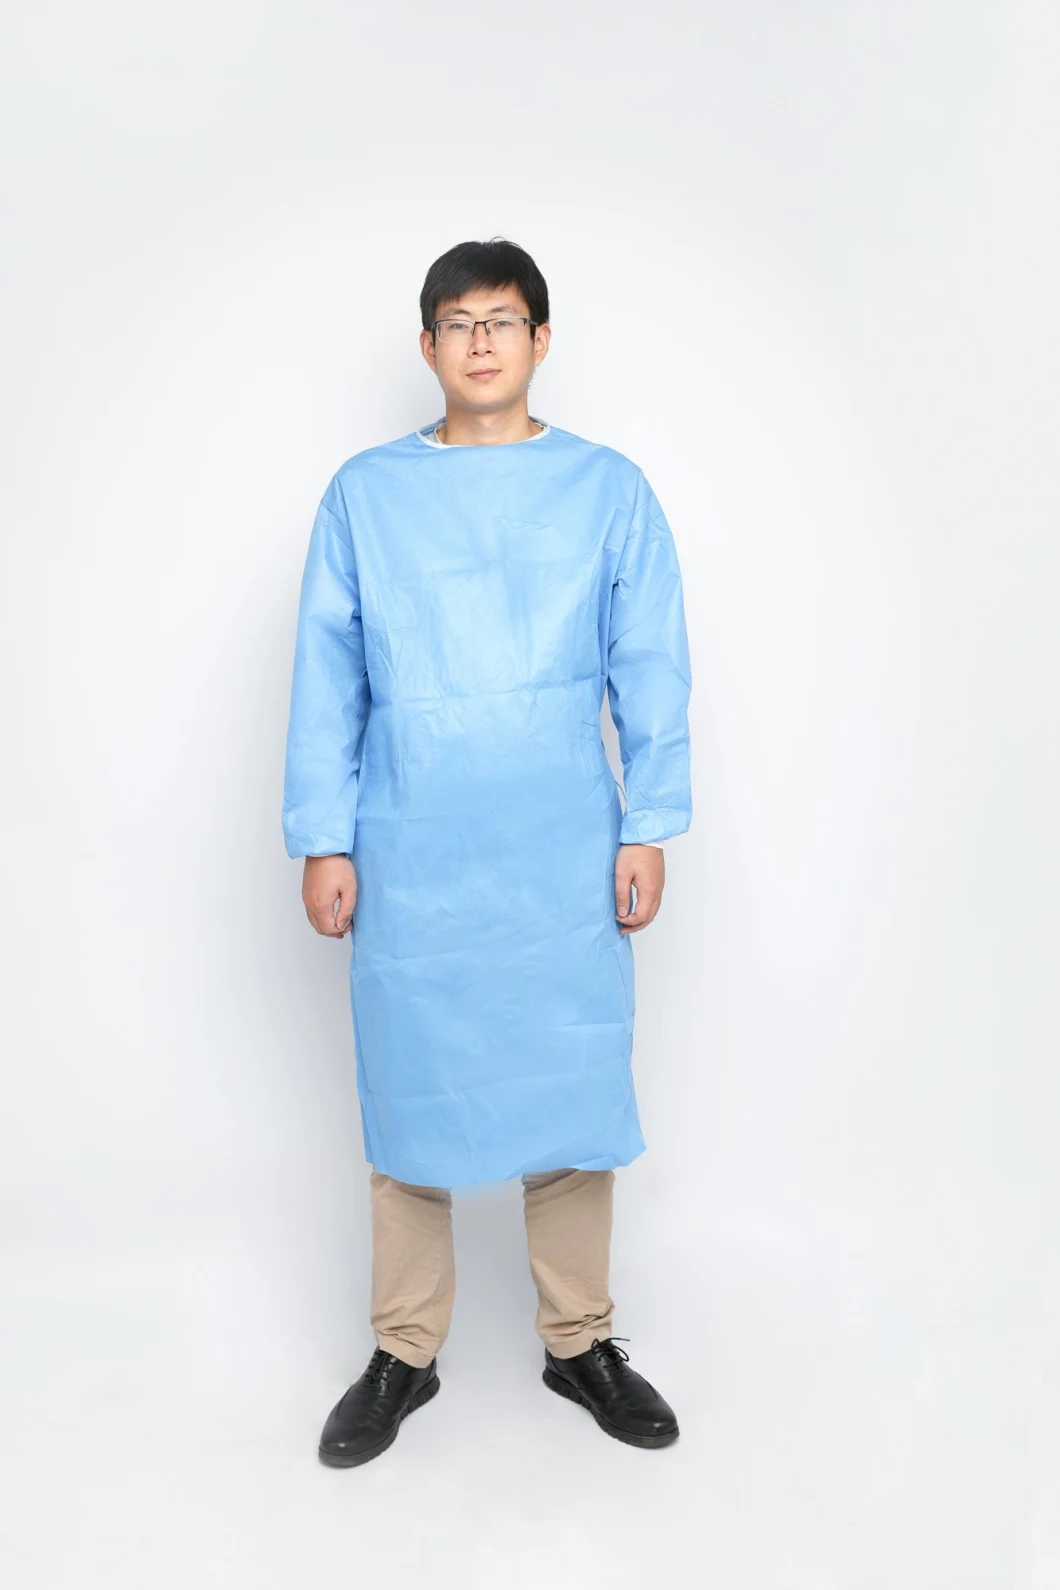 Hospital Sterilized Surgical Level 2 Isolation Gown with Coating with Ultrasonic Sealing